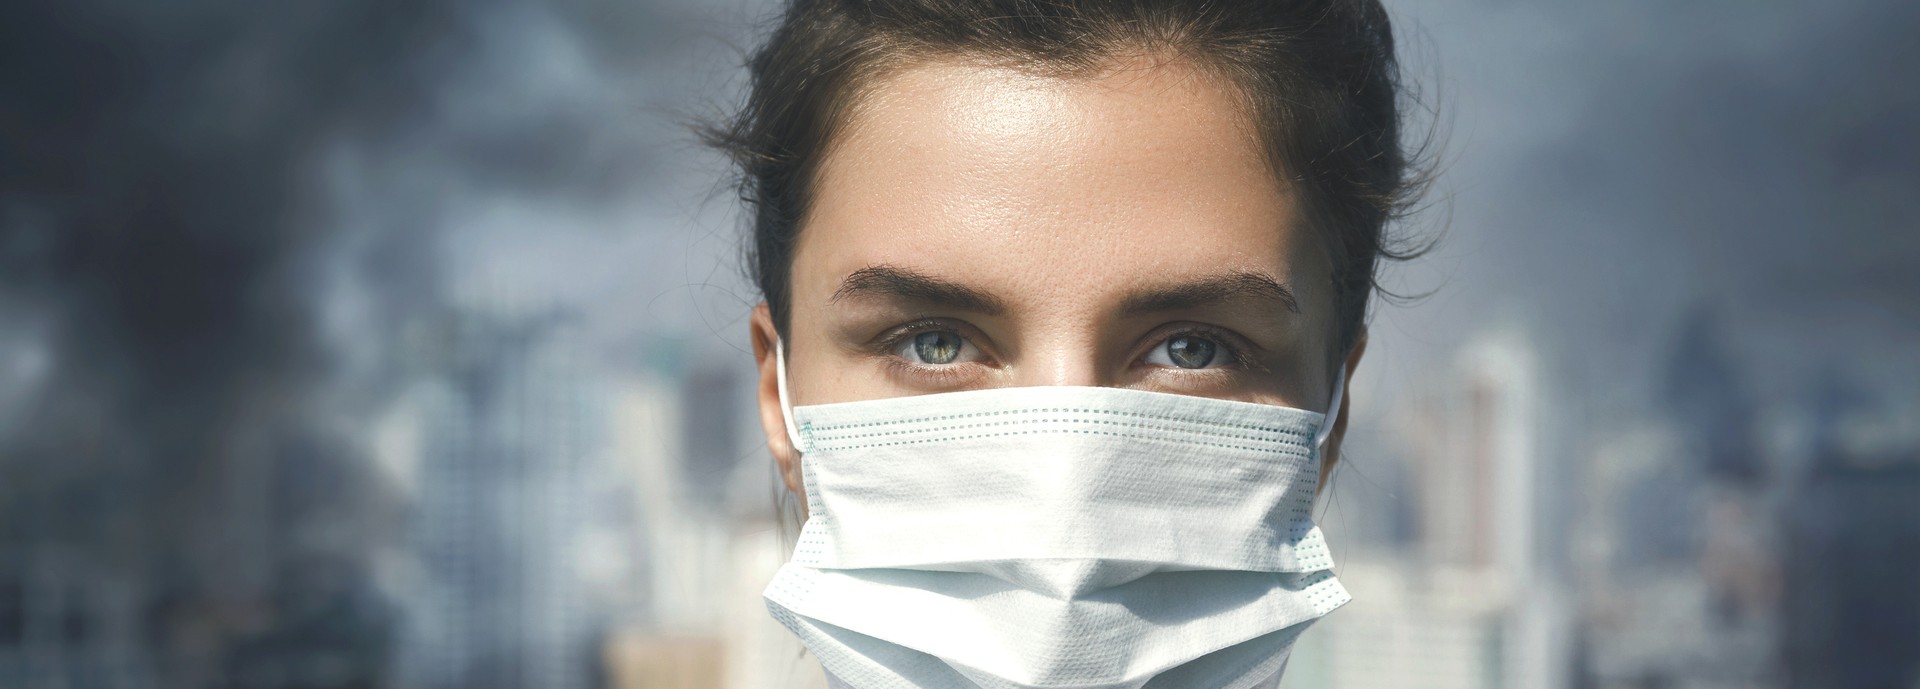 Woman wearing face mask amid air pollution